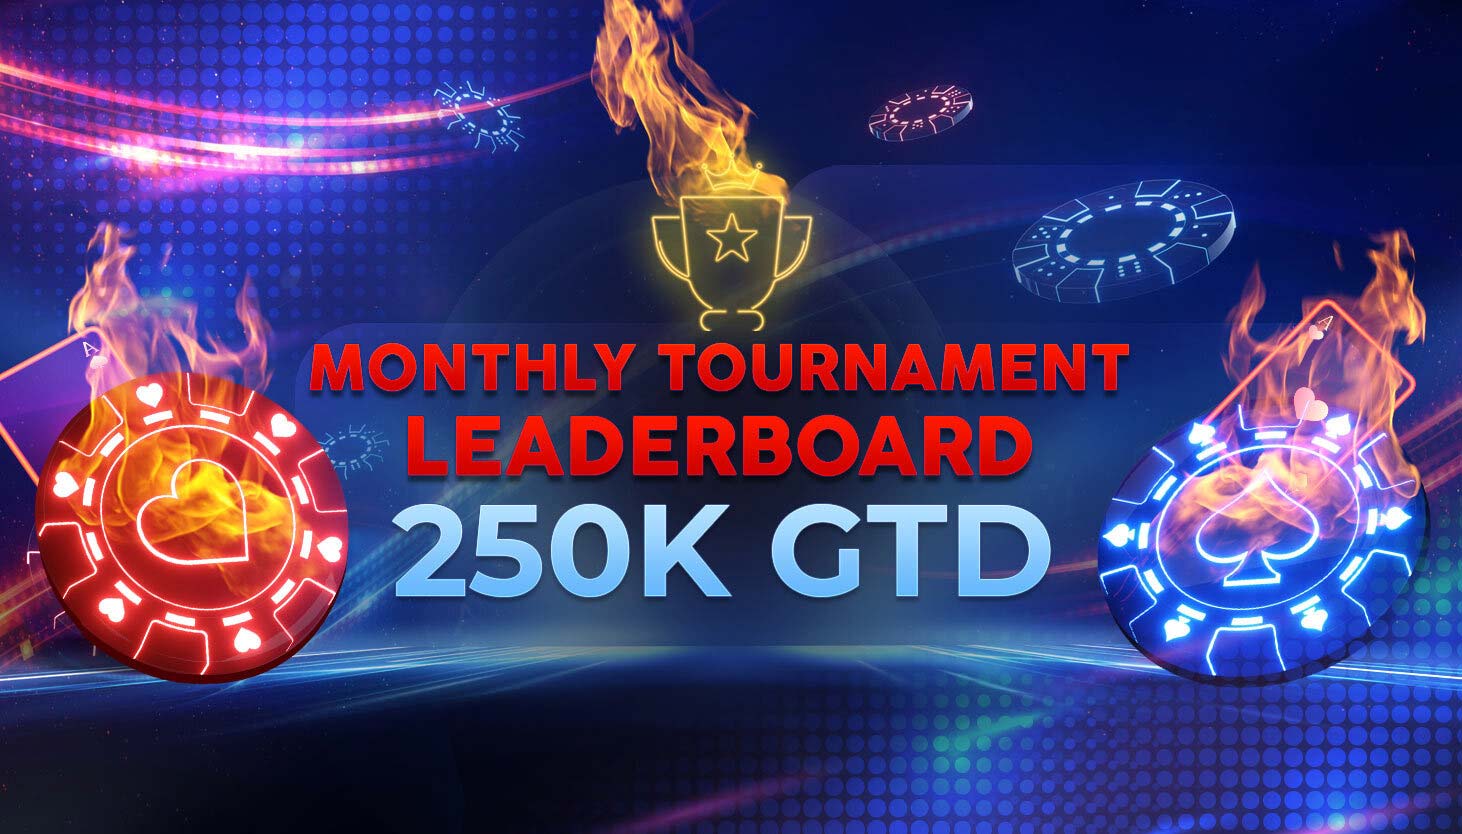 Monthly Tournament Leaderboard